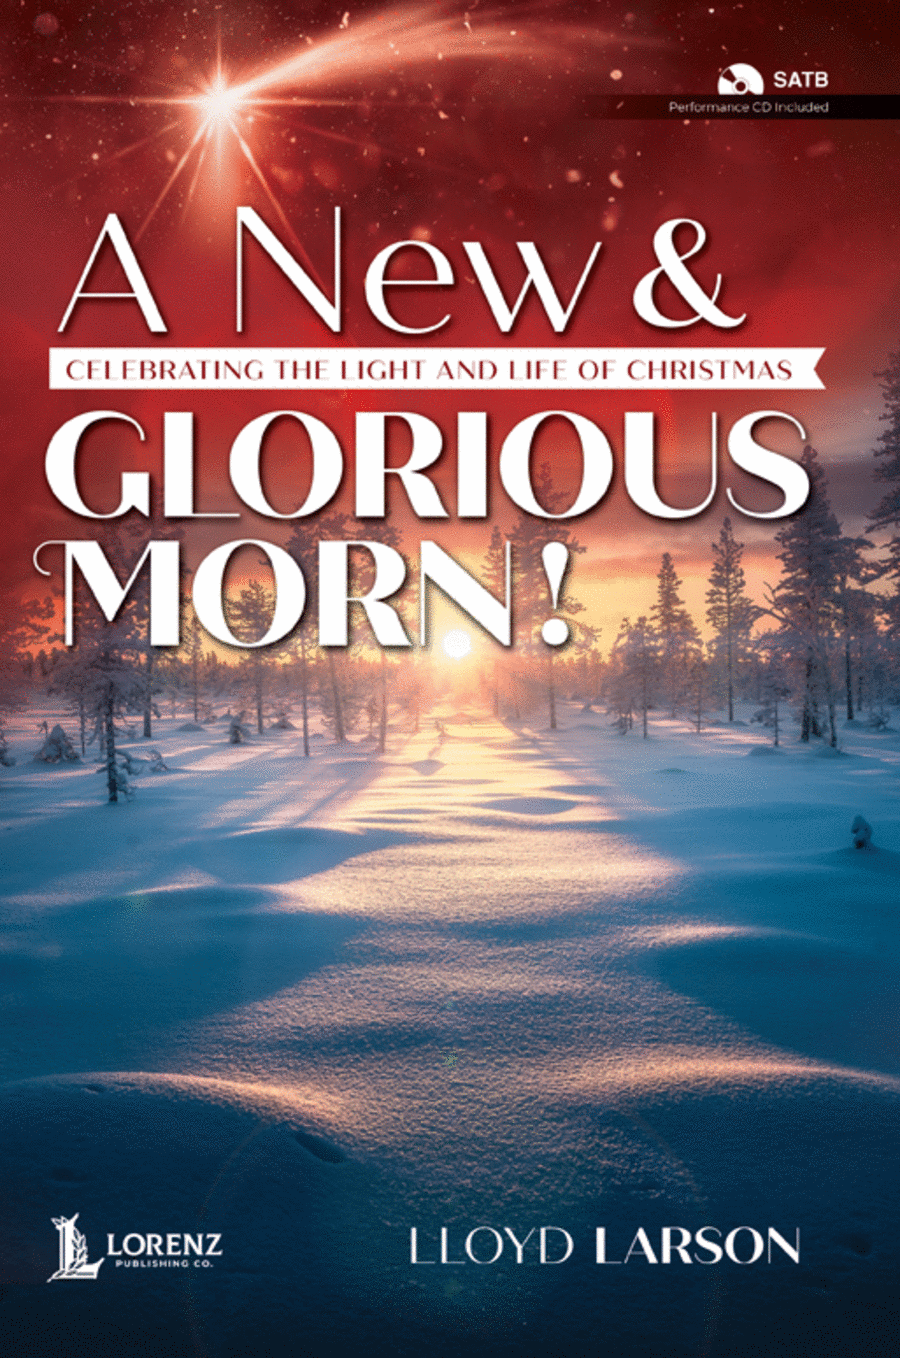 A New and Glorious Morn! - SATB with Performance CD